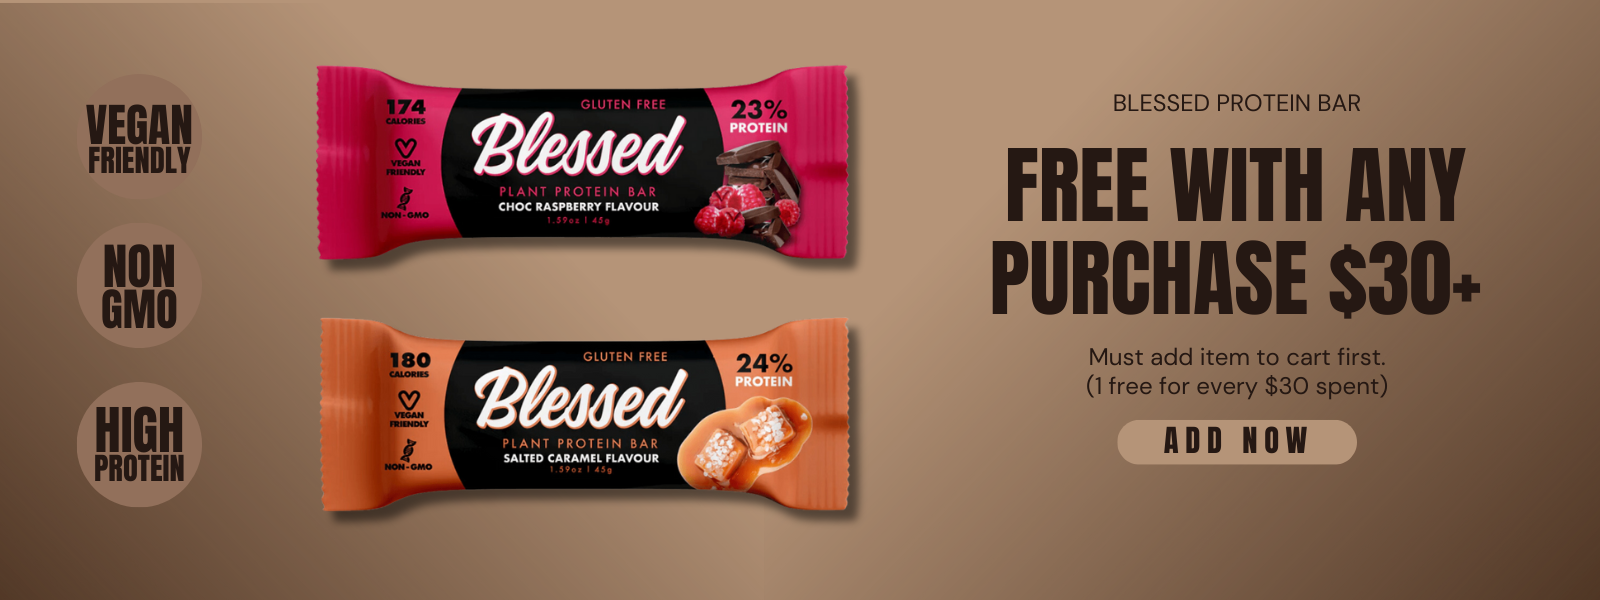 Free Blessed Protein Bar